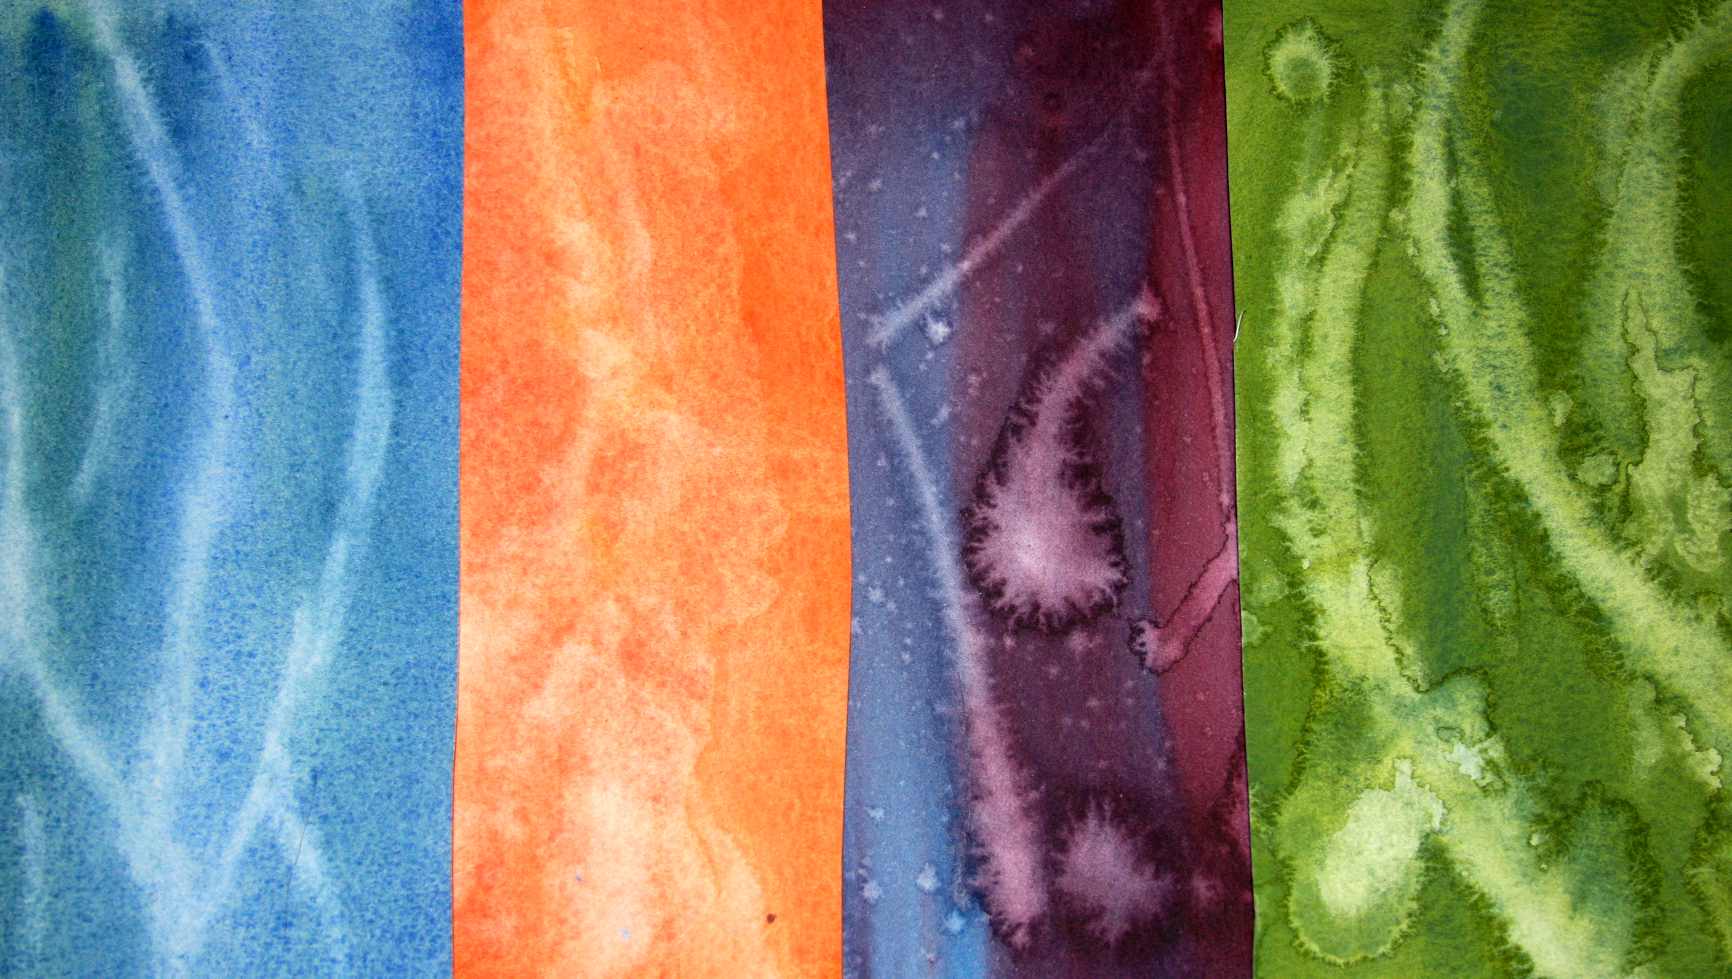 Background colors for kids watercolor art lesson.